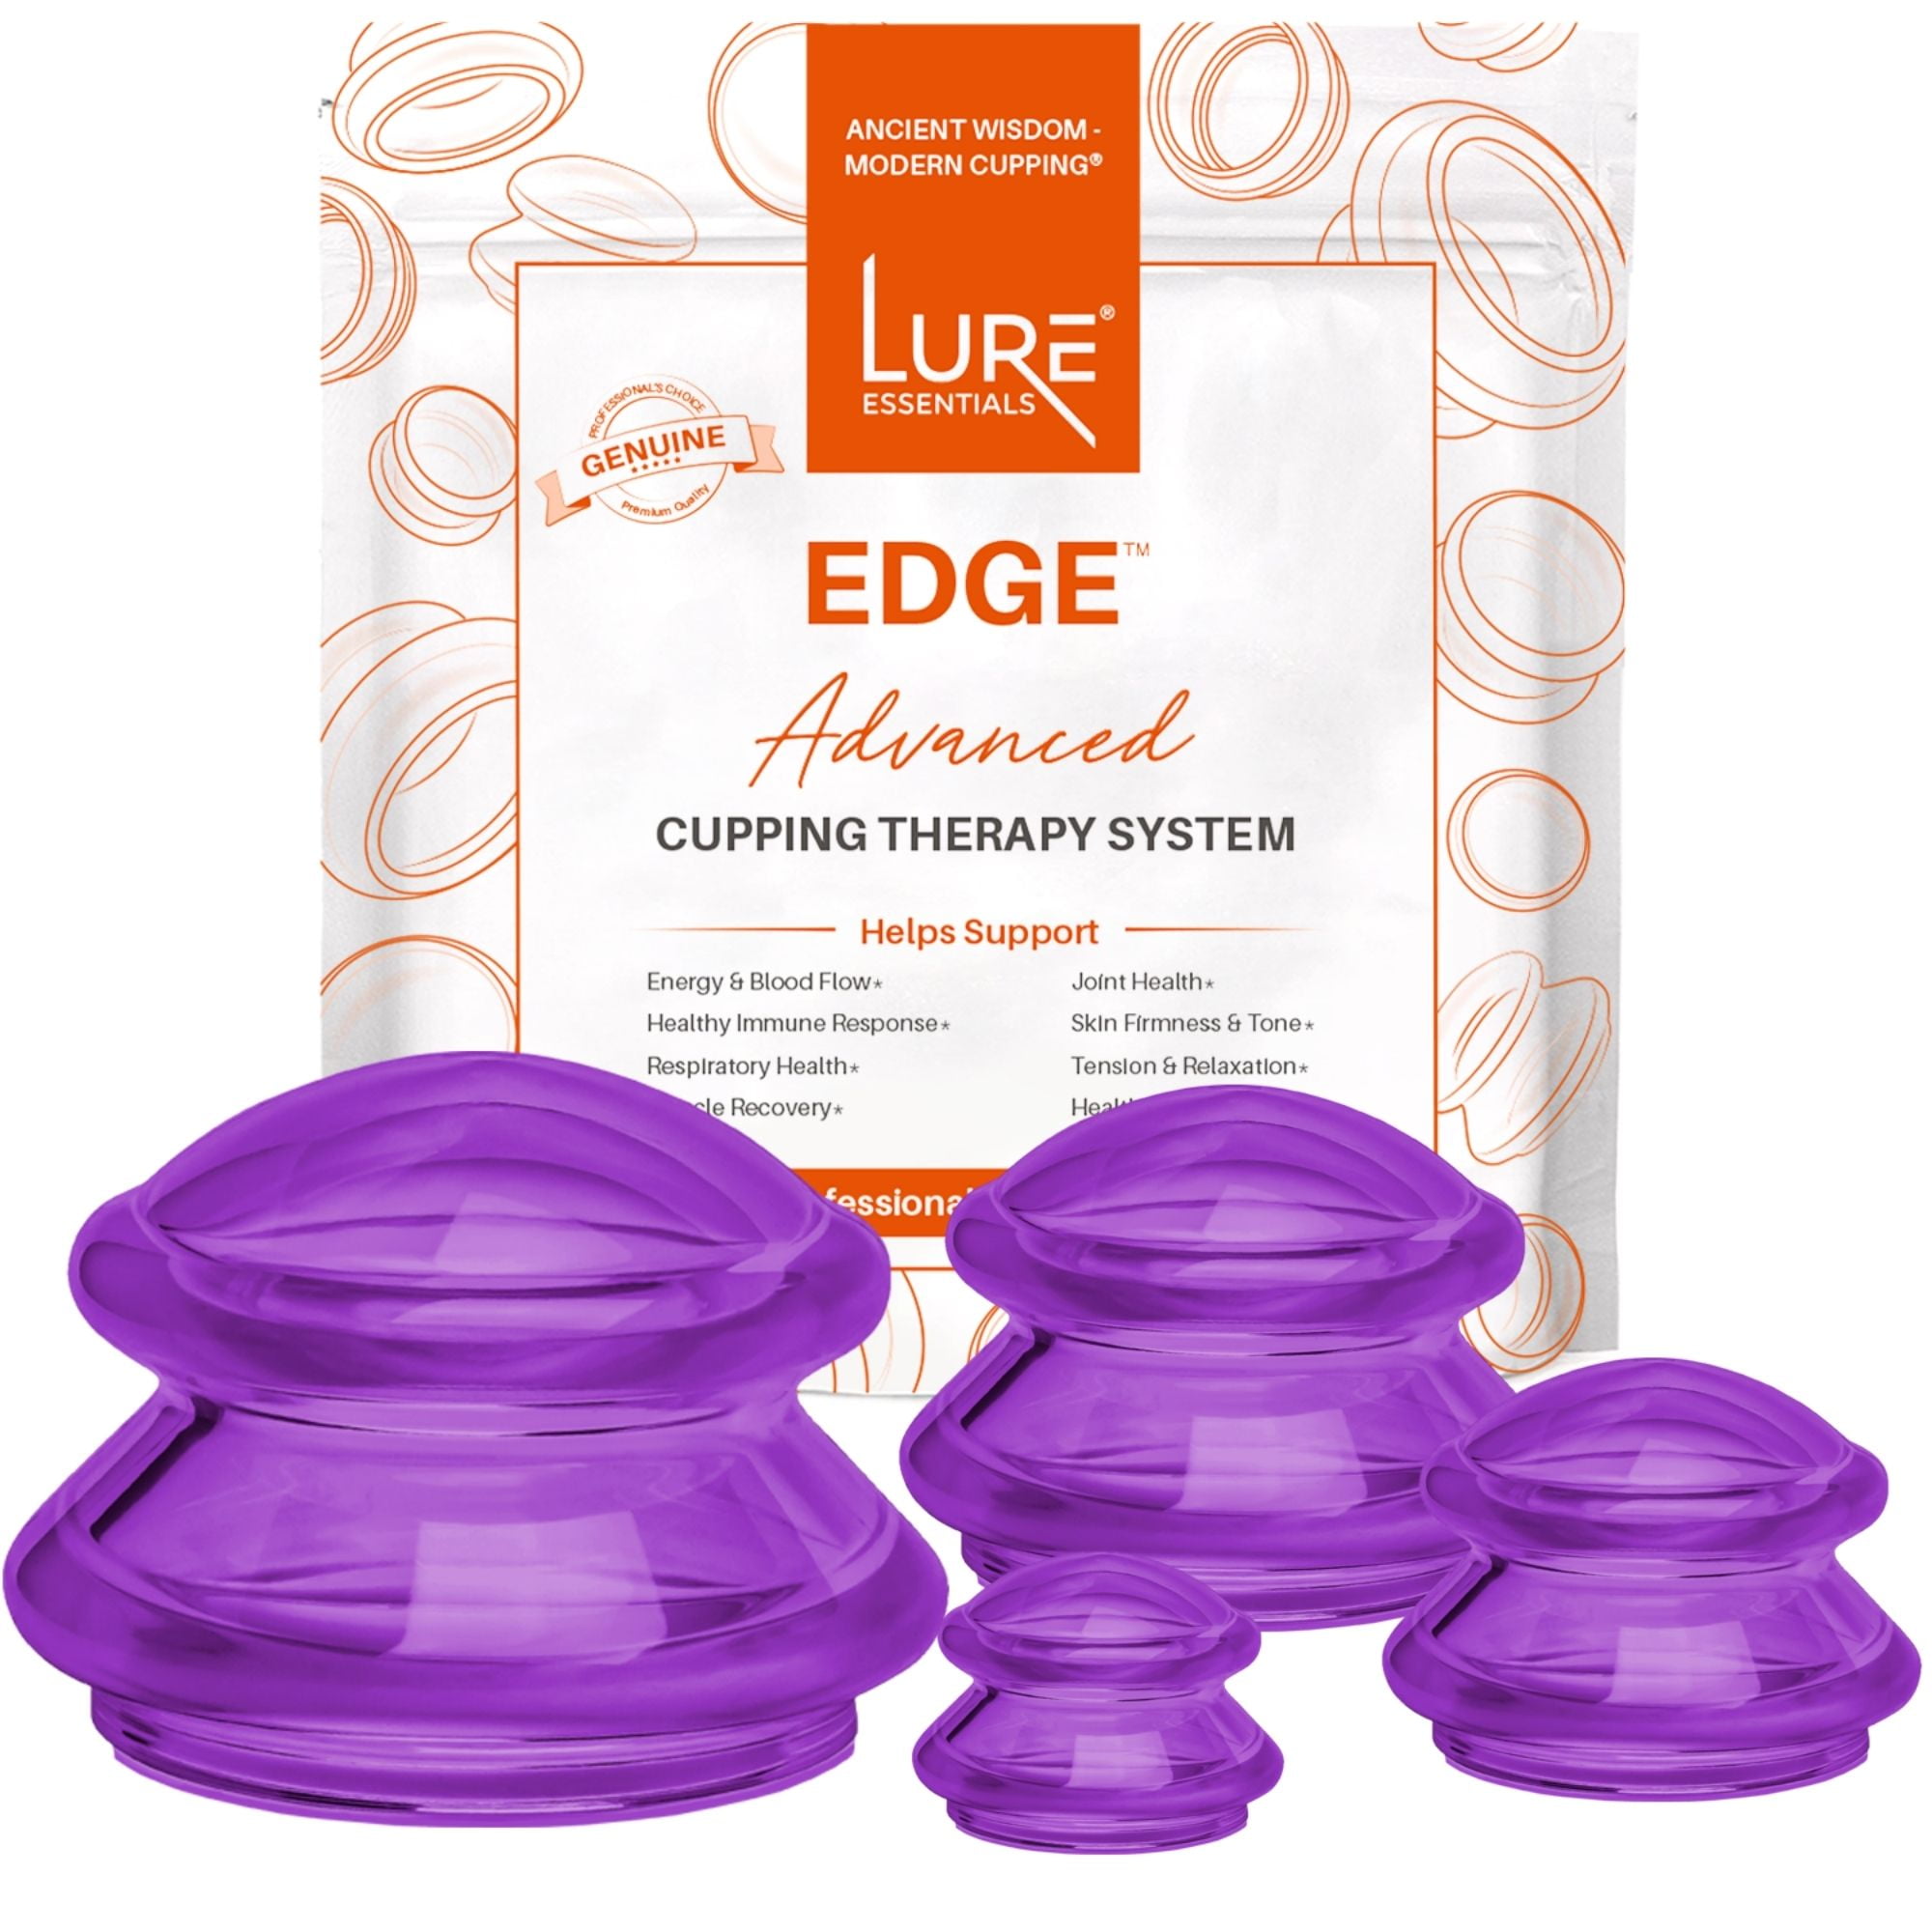 LURE Essentials Edge Cupping Set – Ultra Purple Silicone Cupping